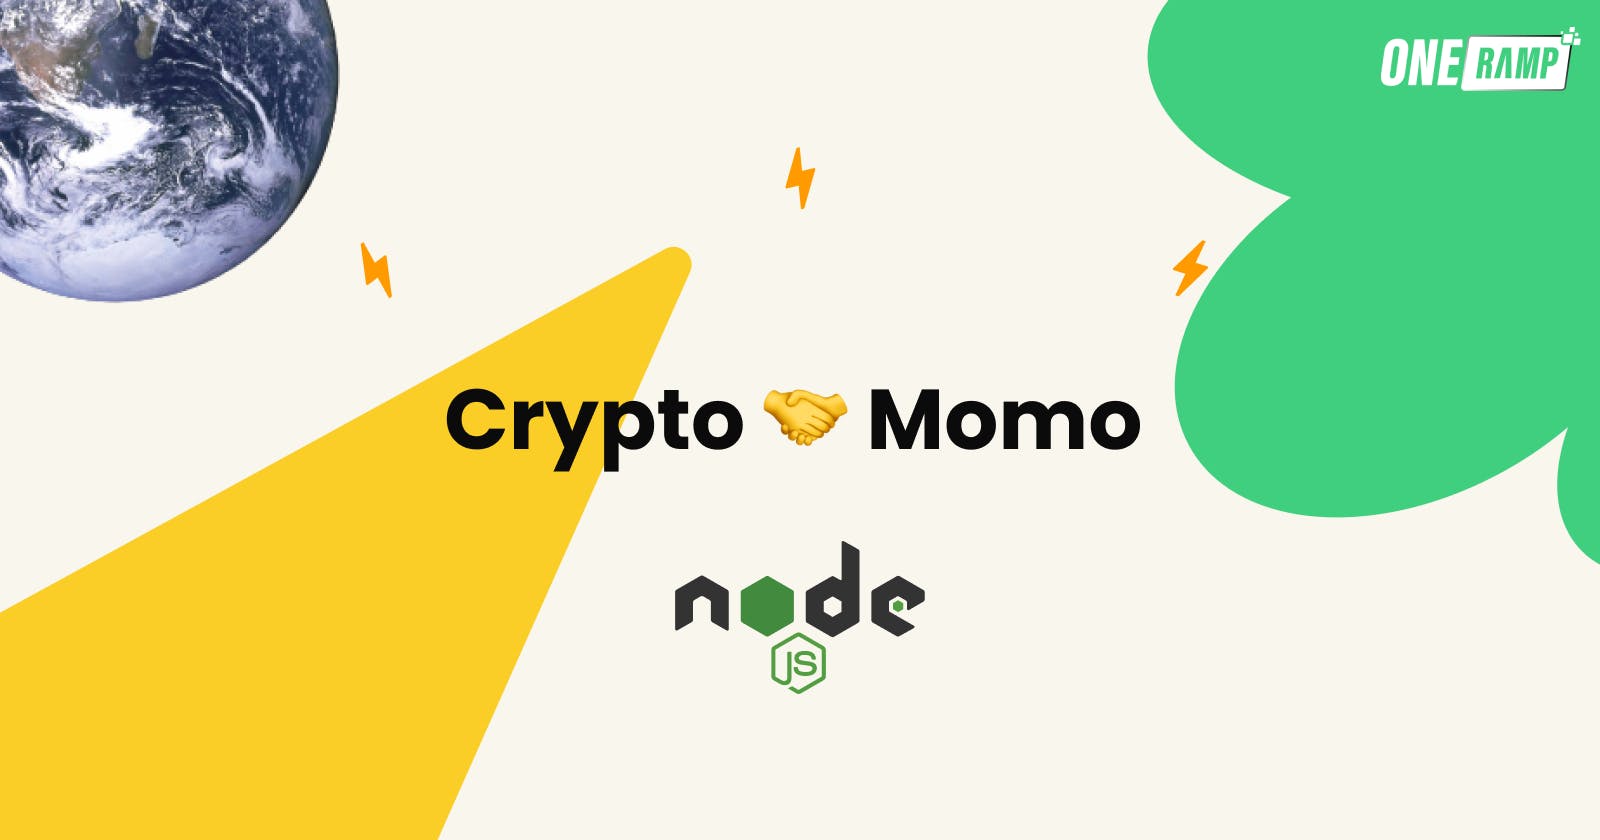 How to offramp your users to mobile money in a node js script.